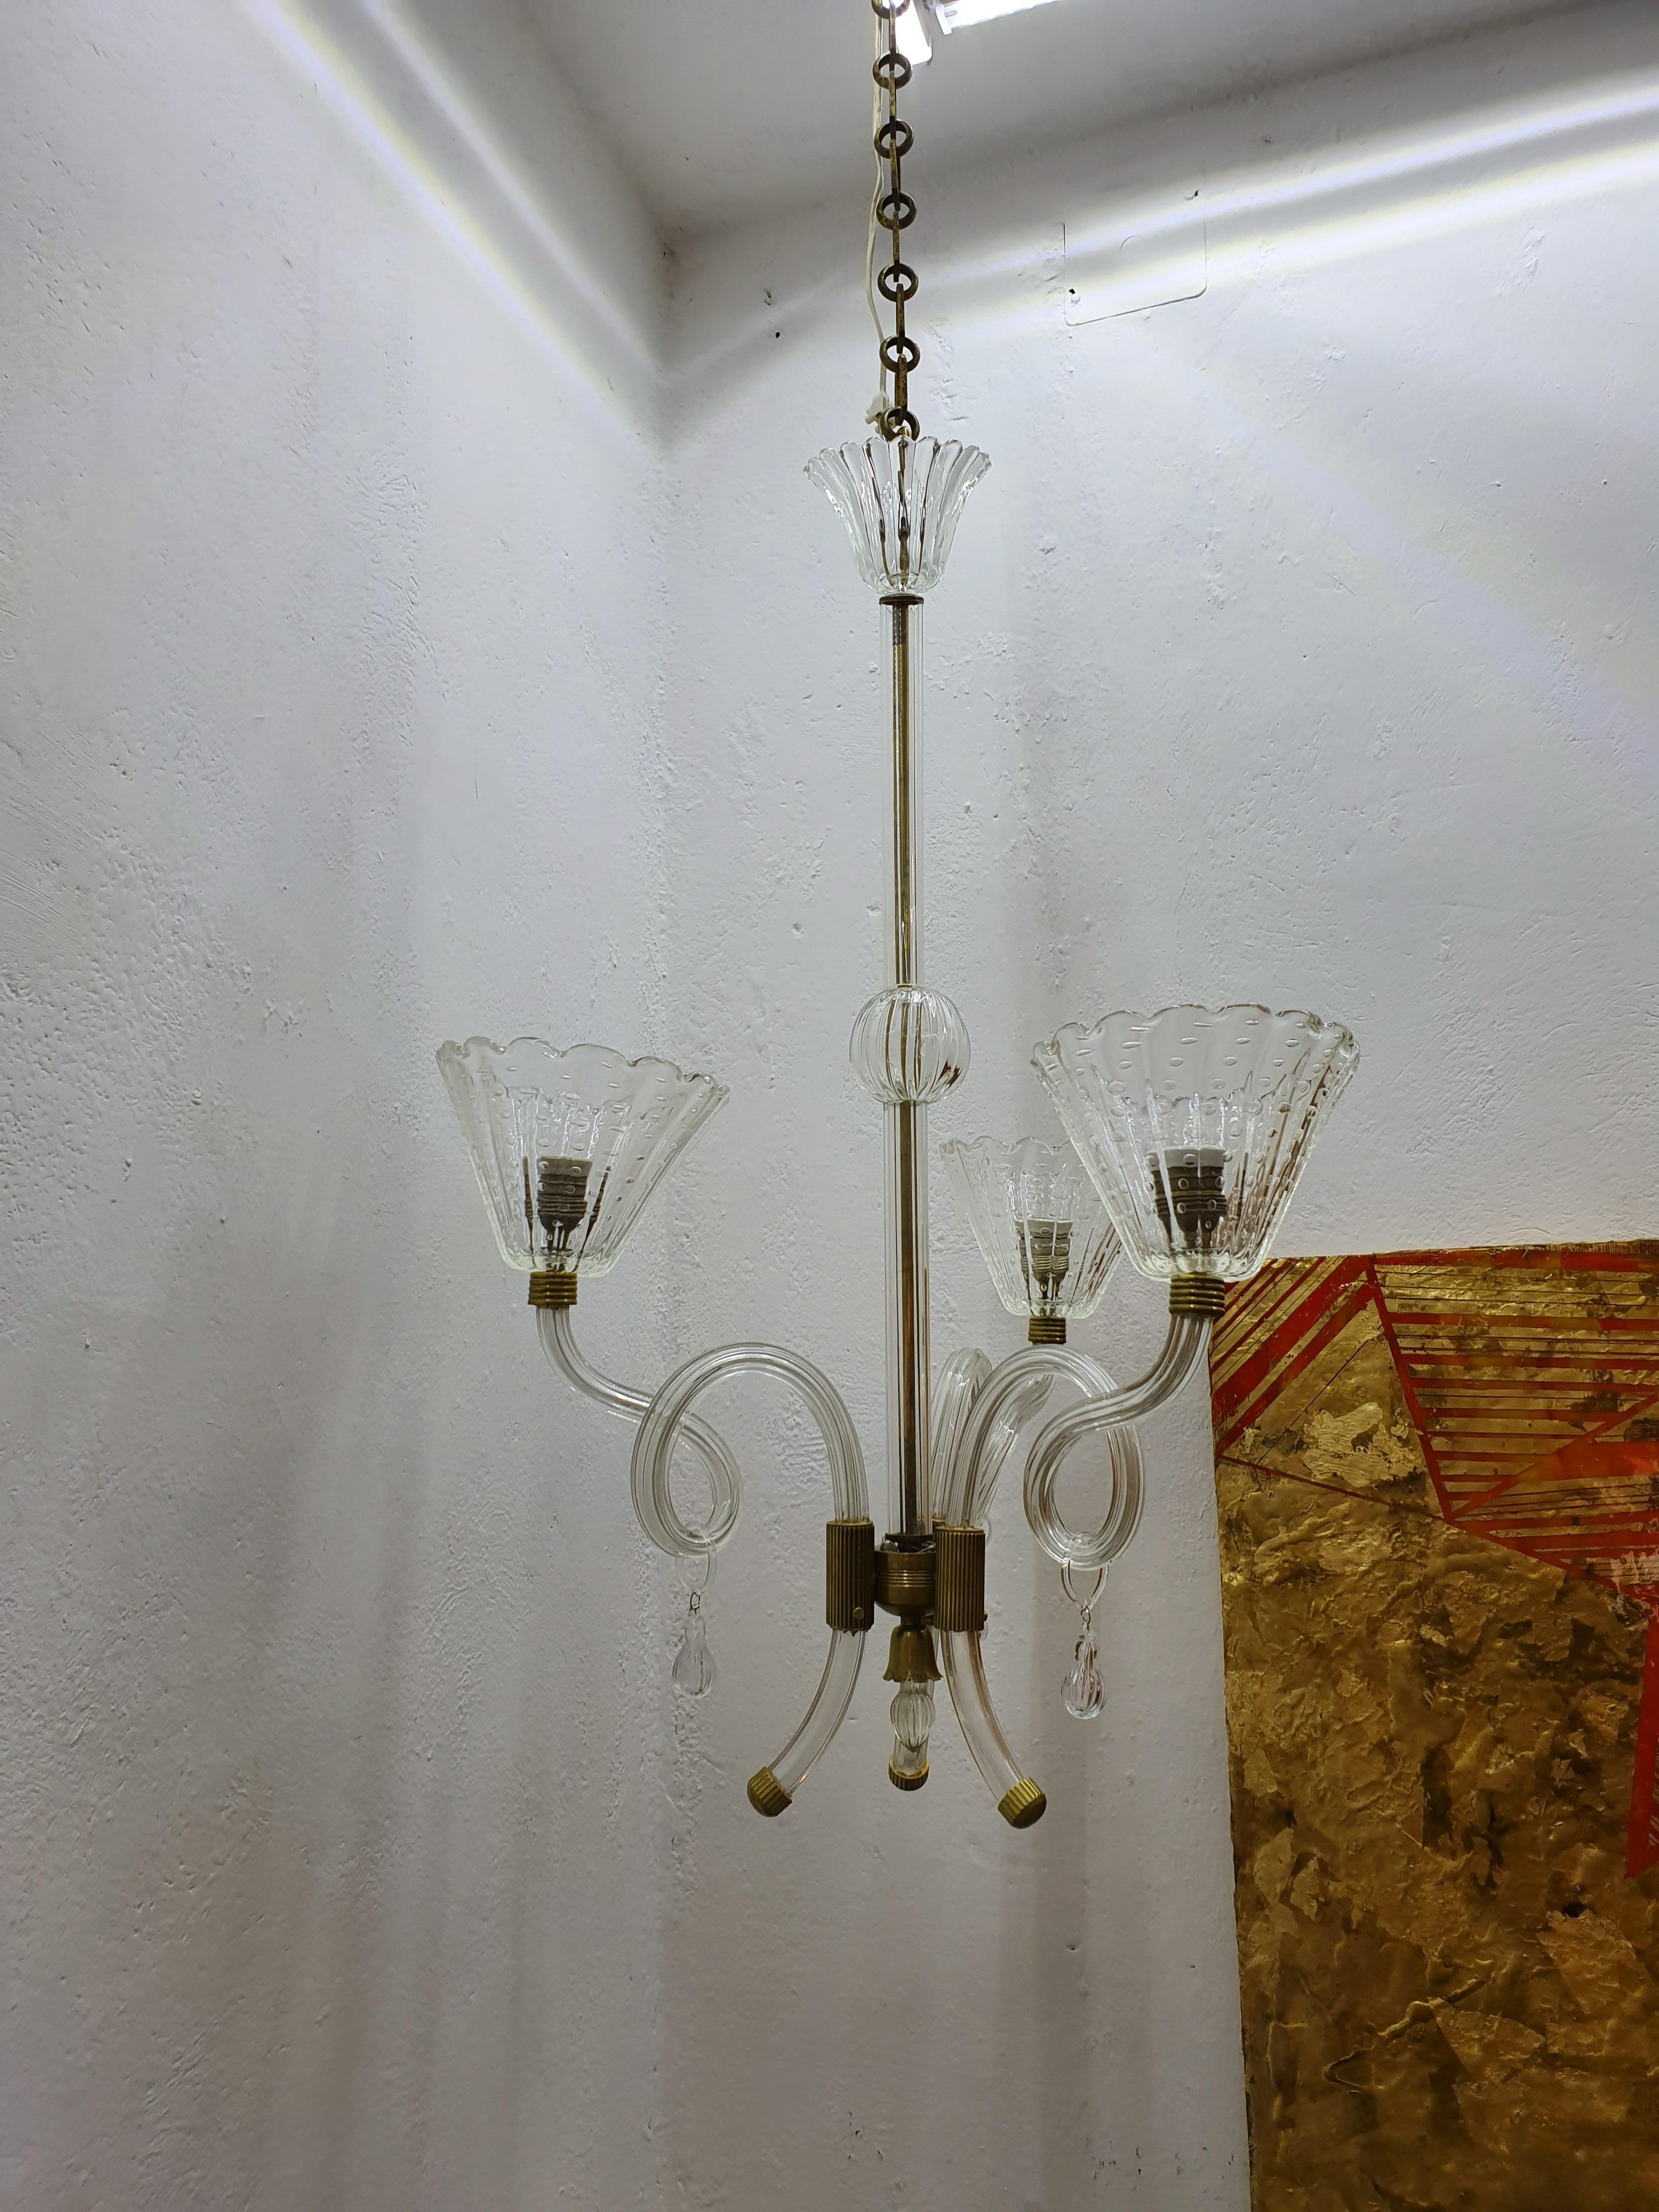 Mid-Century Modern Chandelier by Barovier Toso in Murano Glass, Italy circa 1950 For Sale 1